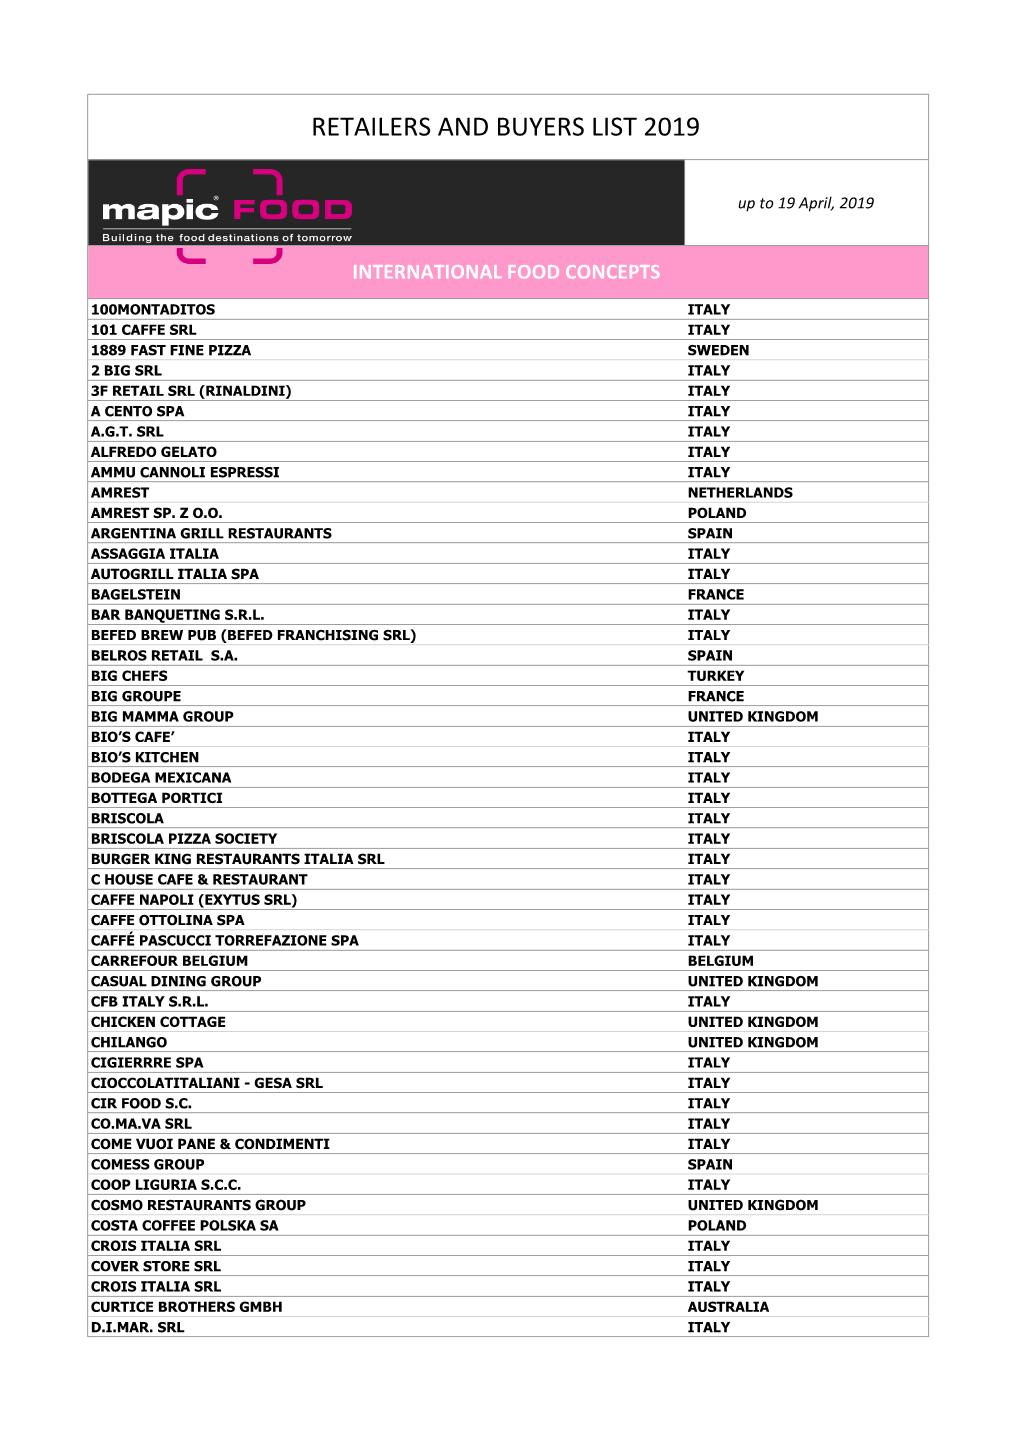 Retailers and Buyers List 2019